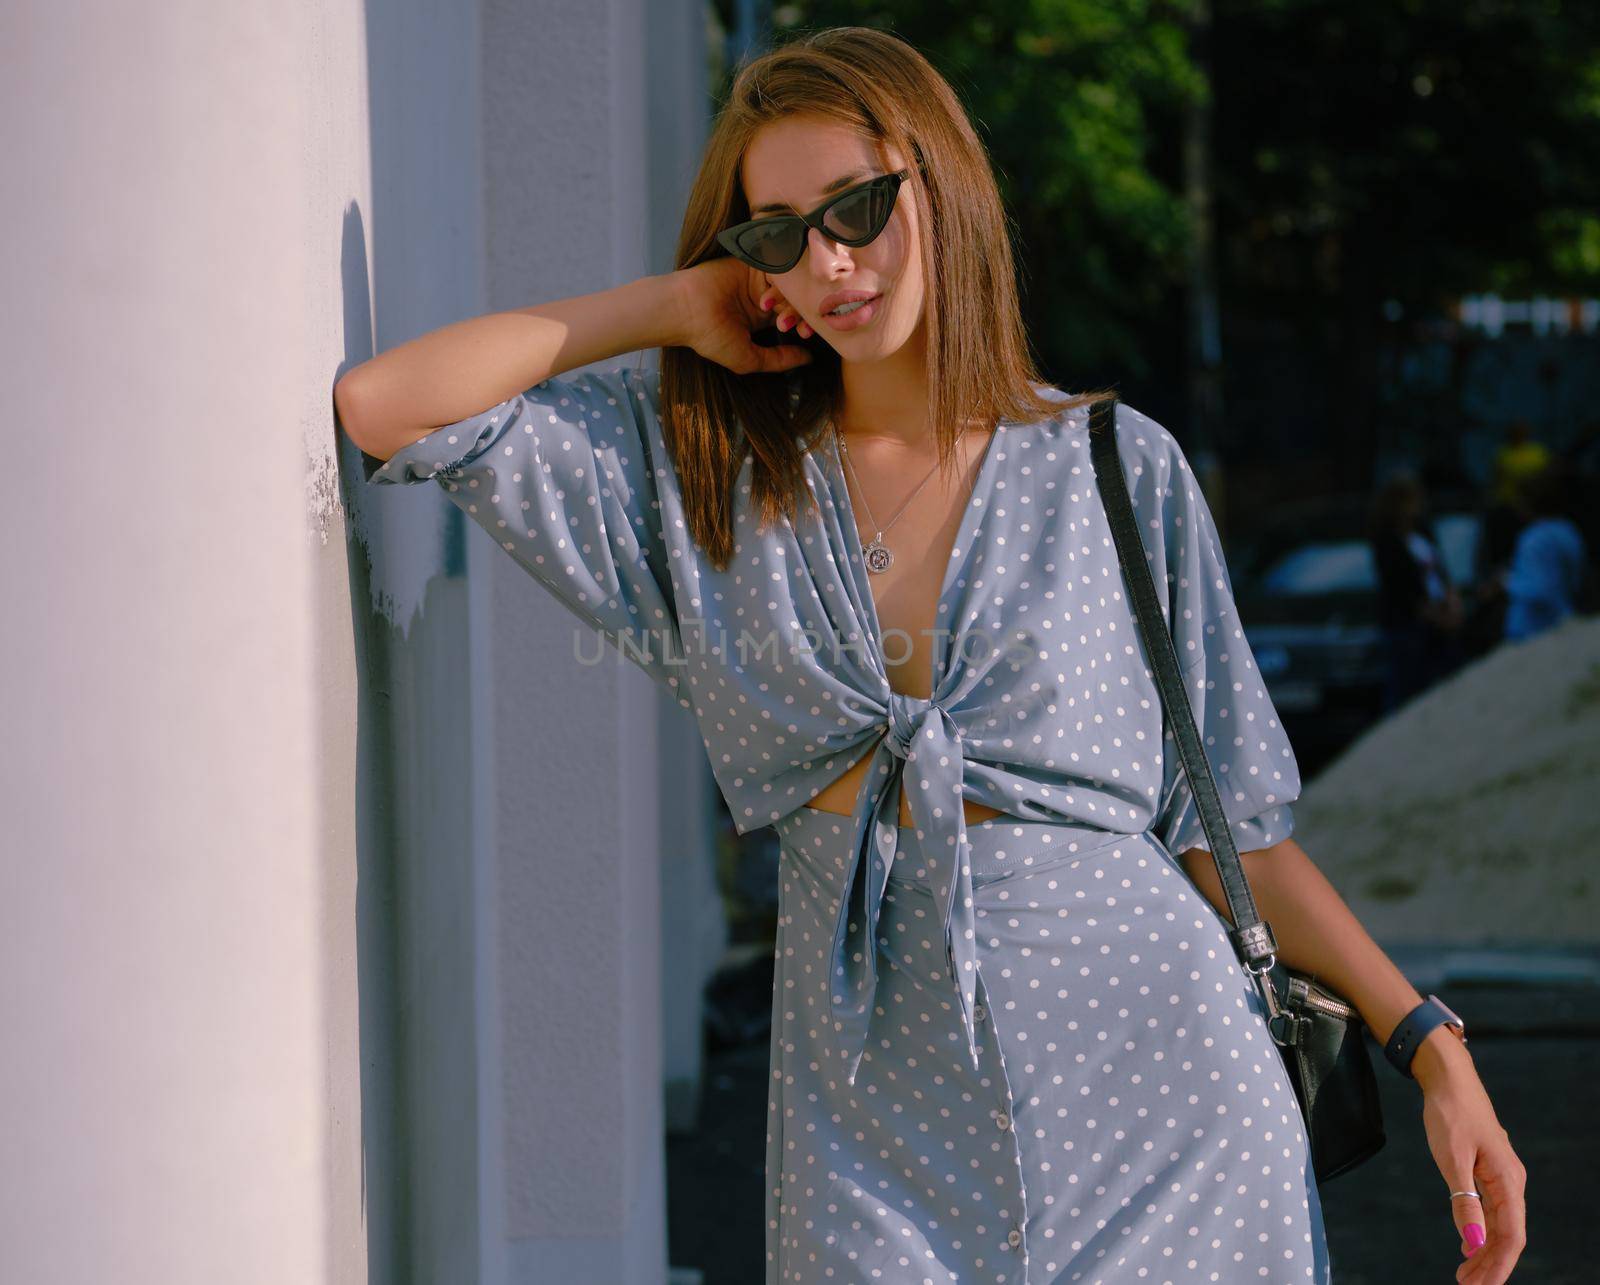 Gorgeous blonde lady in a long blue dress with polka-dots, watch, sunglasses, with a pendant around her neck and a small black handbag on her shoulder is posing leaning her elbow on a wall and looking at the camera while walking alone in the city. The concept of fashion and style. Close-up shot.